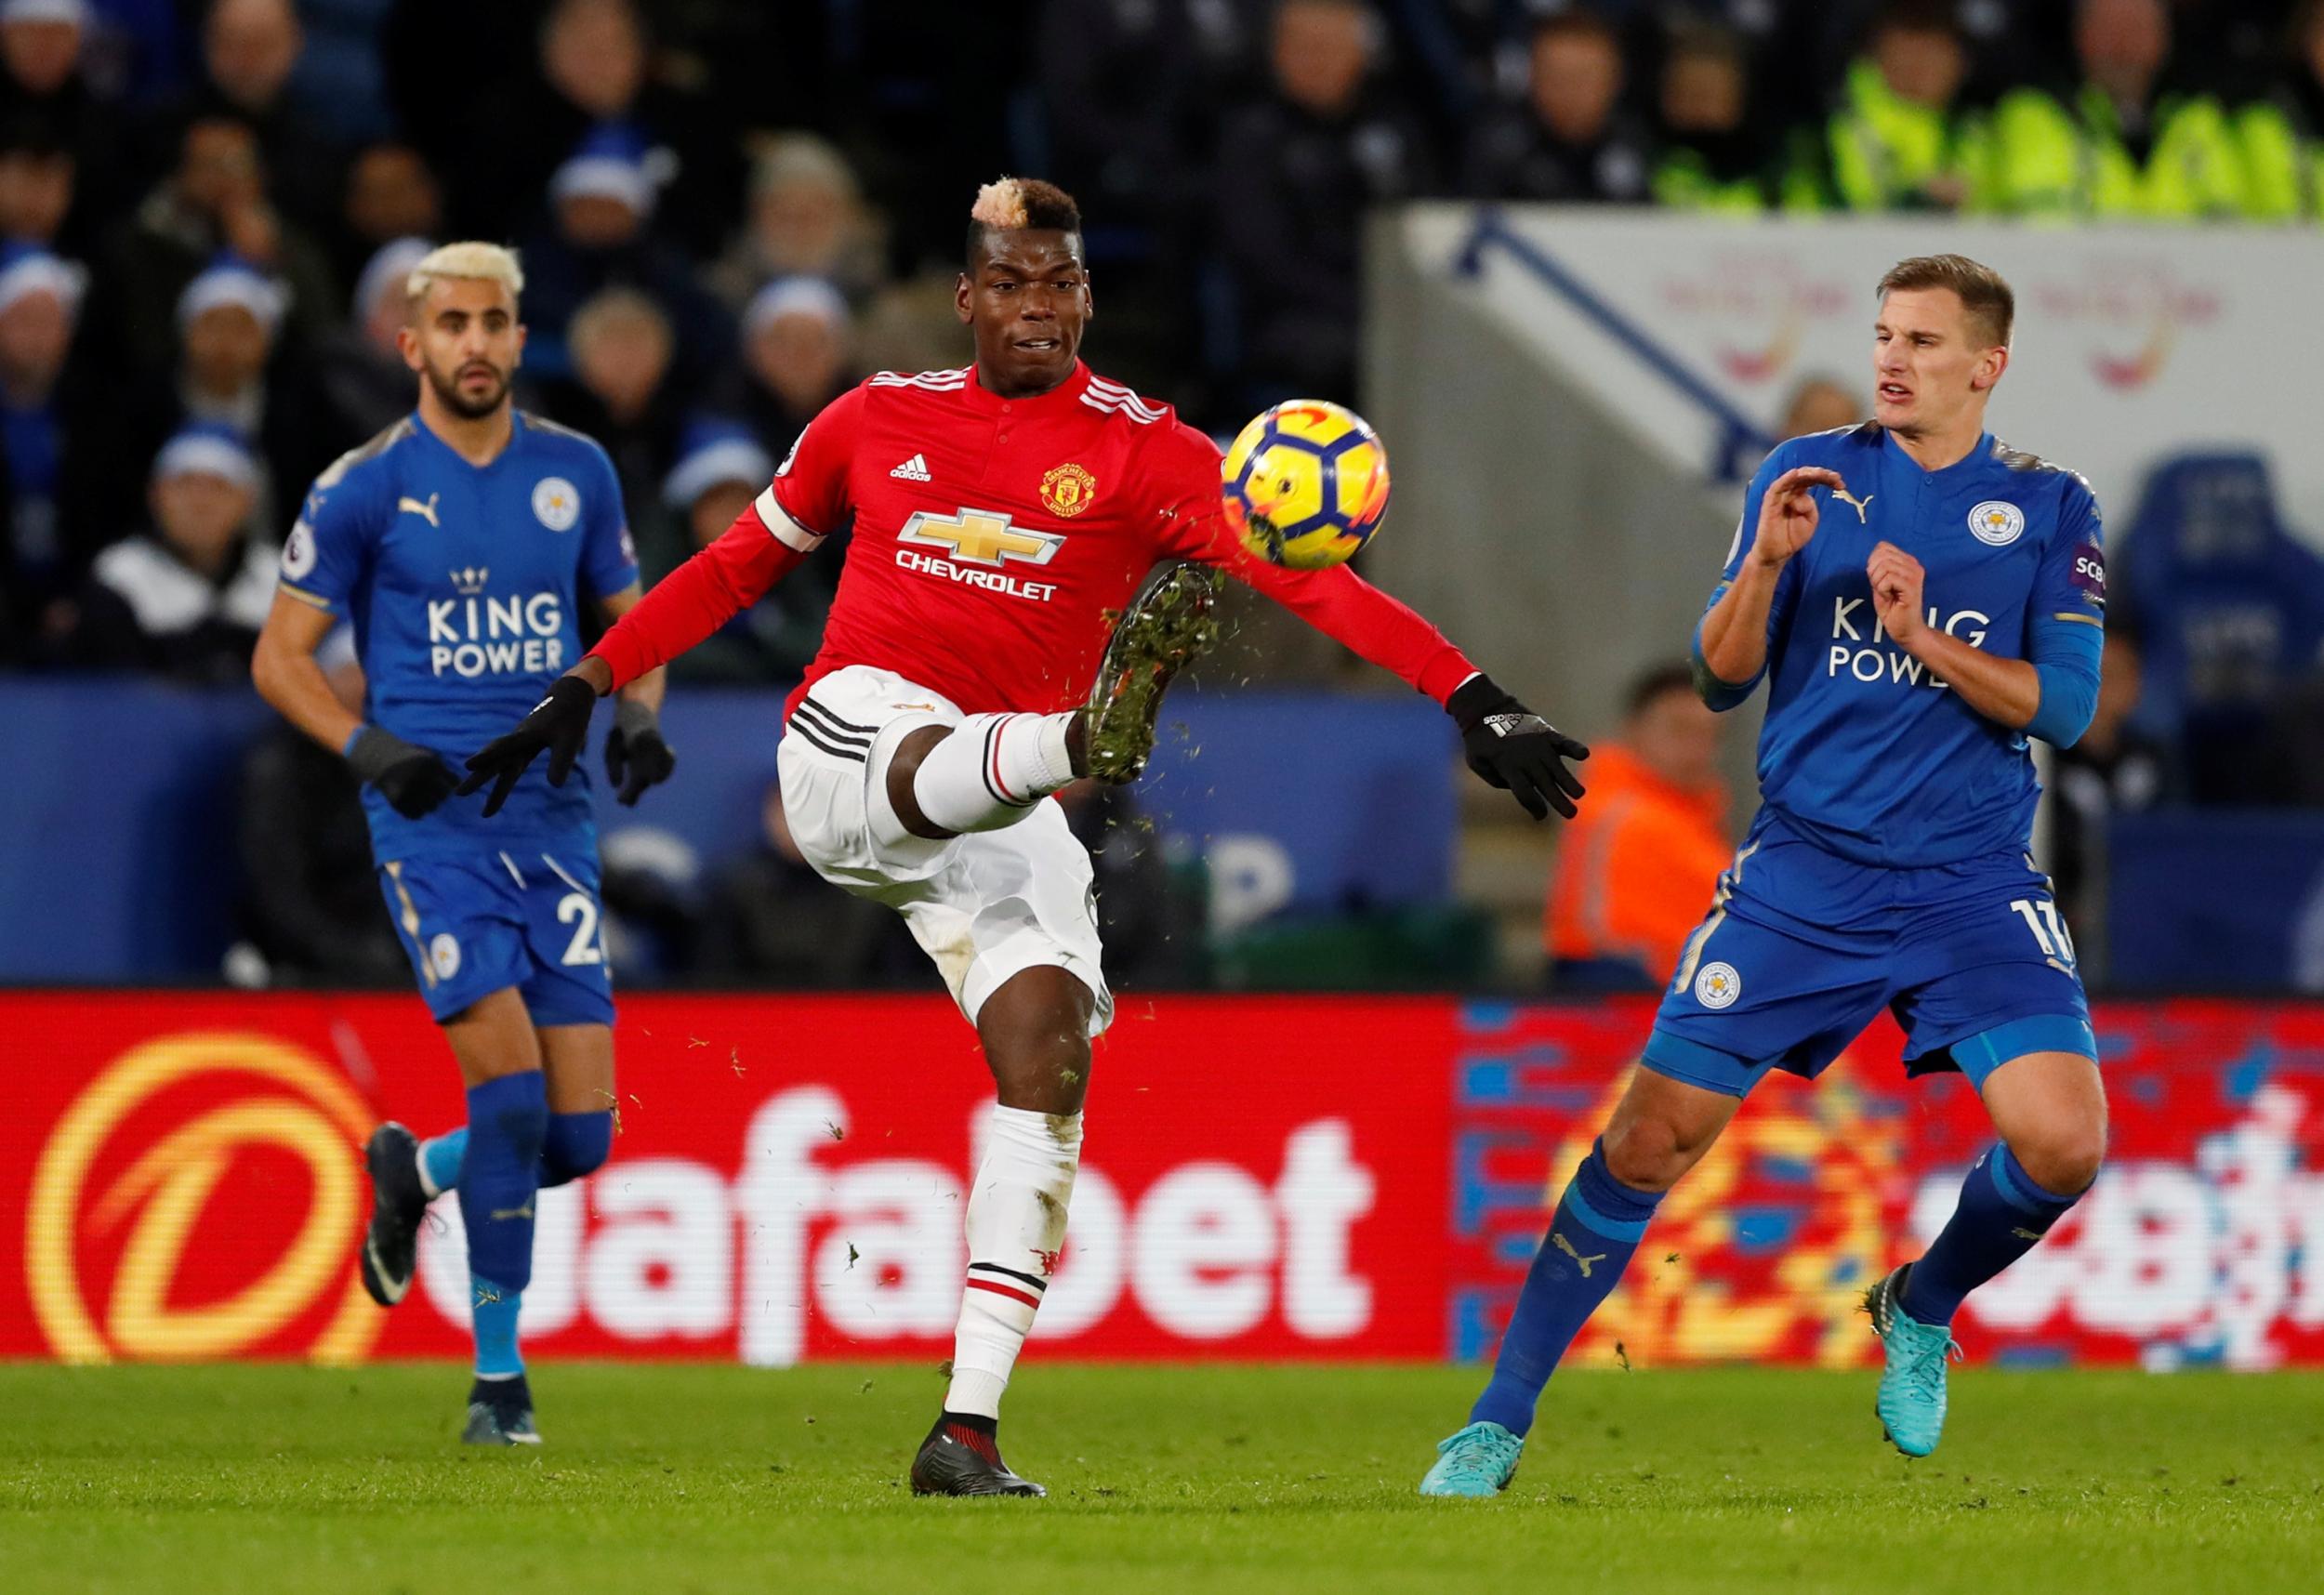 Manchester United face Leicester City in the opening game of the 2018/19 Premier League season and illegal links to a live stream of the game are set to appear across Reddit, Facebook and other social media sites